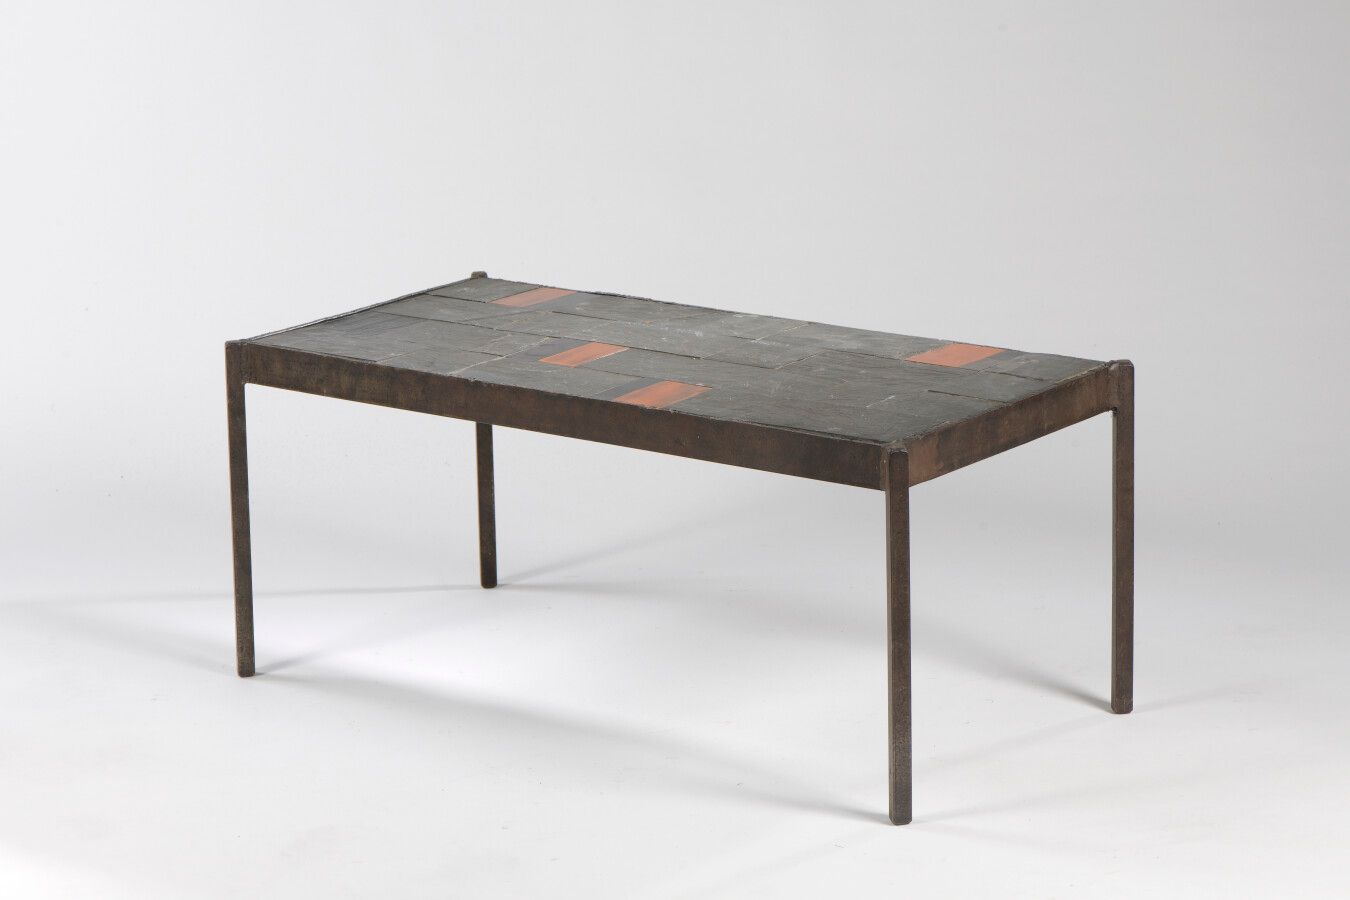 Null Mado JOLIN (1921-2019)

Work of the 1960's

Low table

Ceramic and slate, w&hellip;